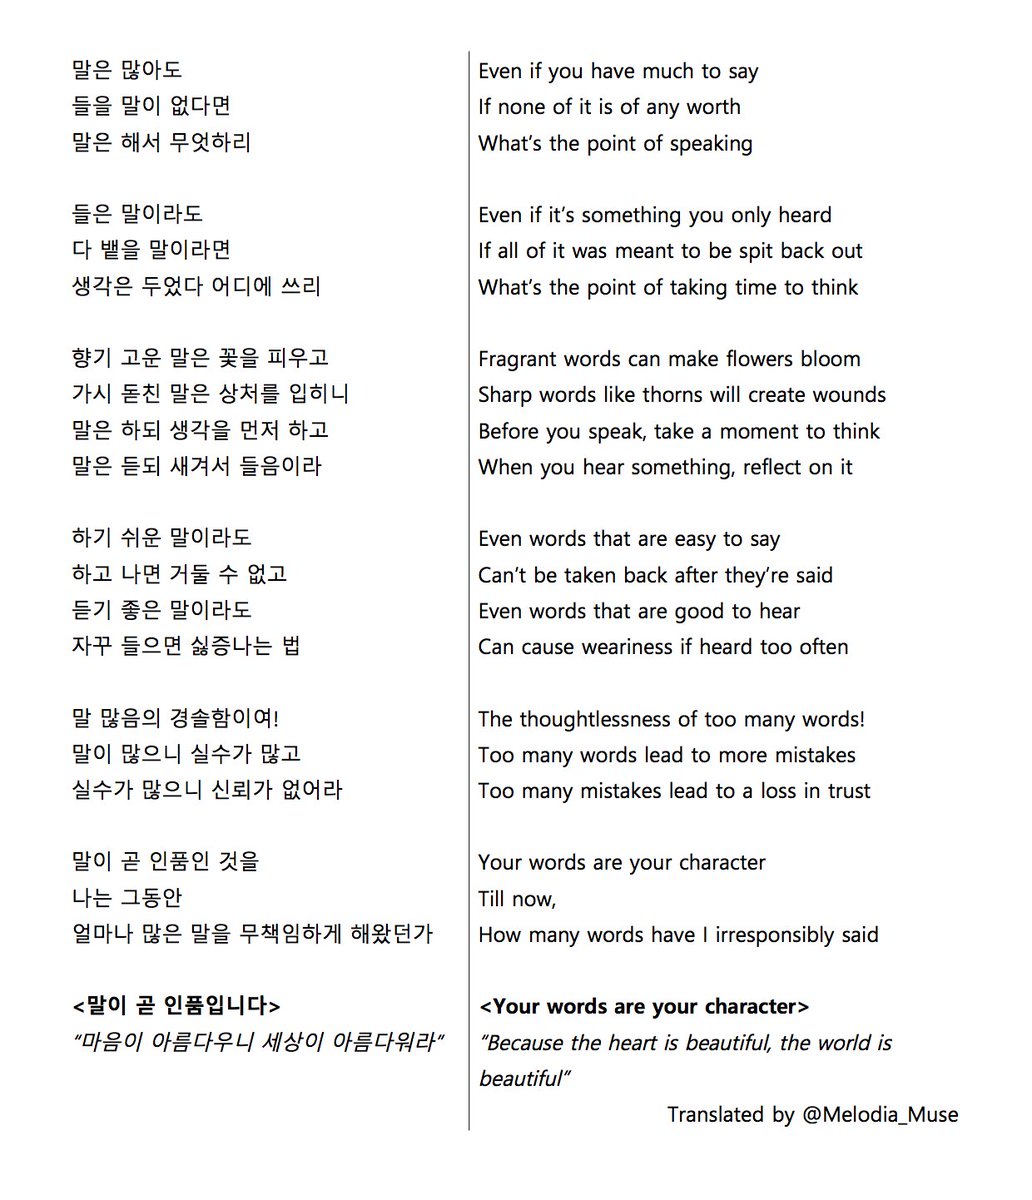 [Minhyun's Book Club]Passage 20. <Your words are your character> from "Because the heart is beautiful, the world is beautiful"Chose this passage because it reminds me so much of how Minhyun carries himself and is very thoughtful with his words.